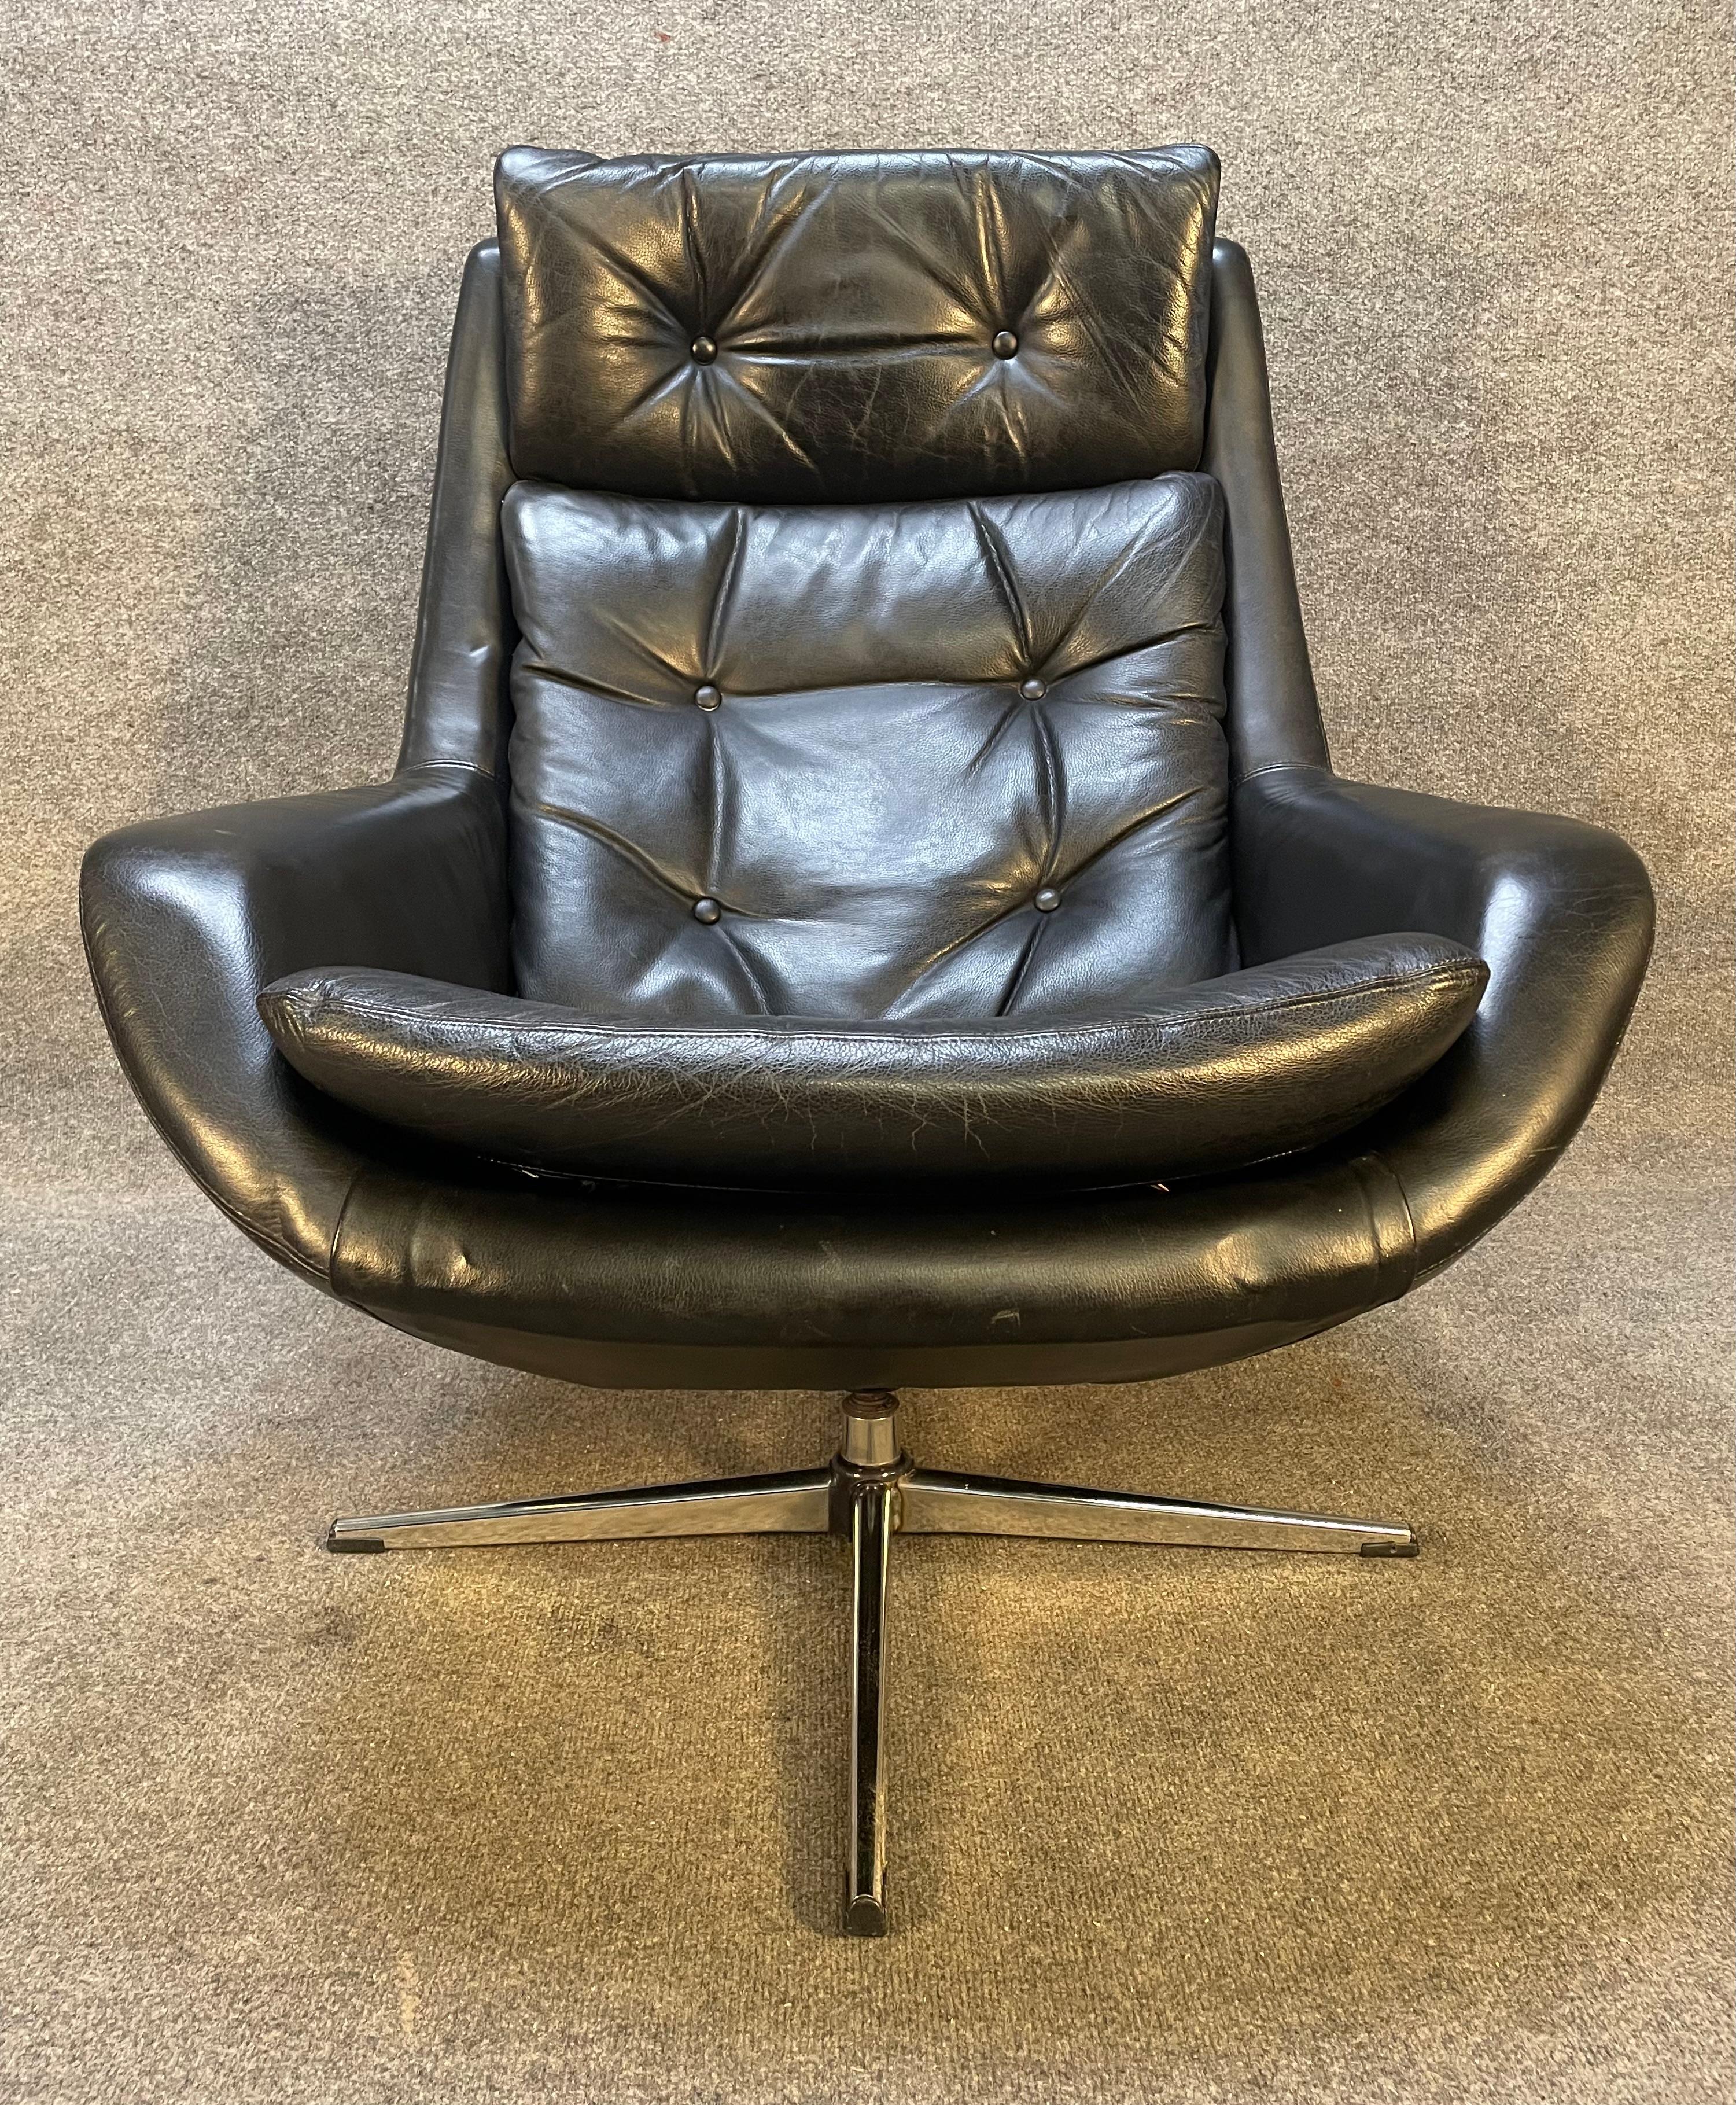 Here is a beautiful 1960's scandinavian modern easy chair in black leather designed by Henry Walter Klein and manufactured by Bramin Miobker in Denmark.
This comfortable chair, recently imported from Europe to California, features an all original